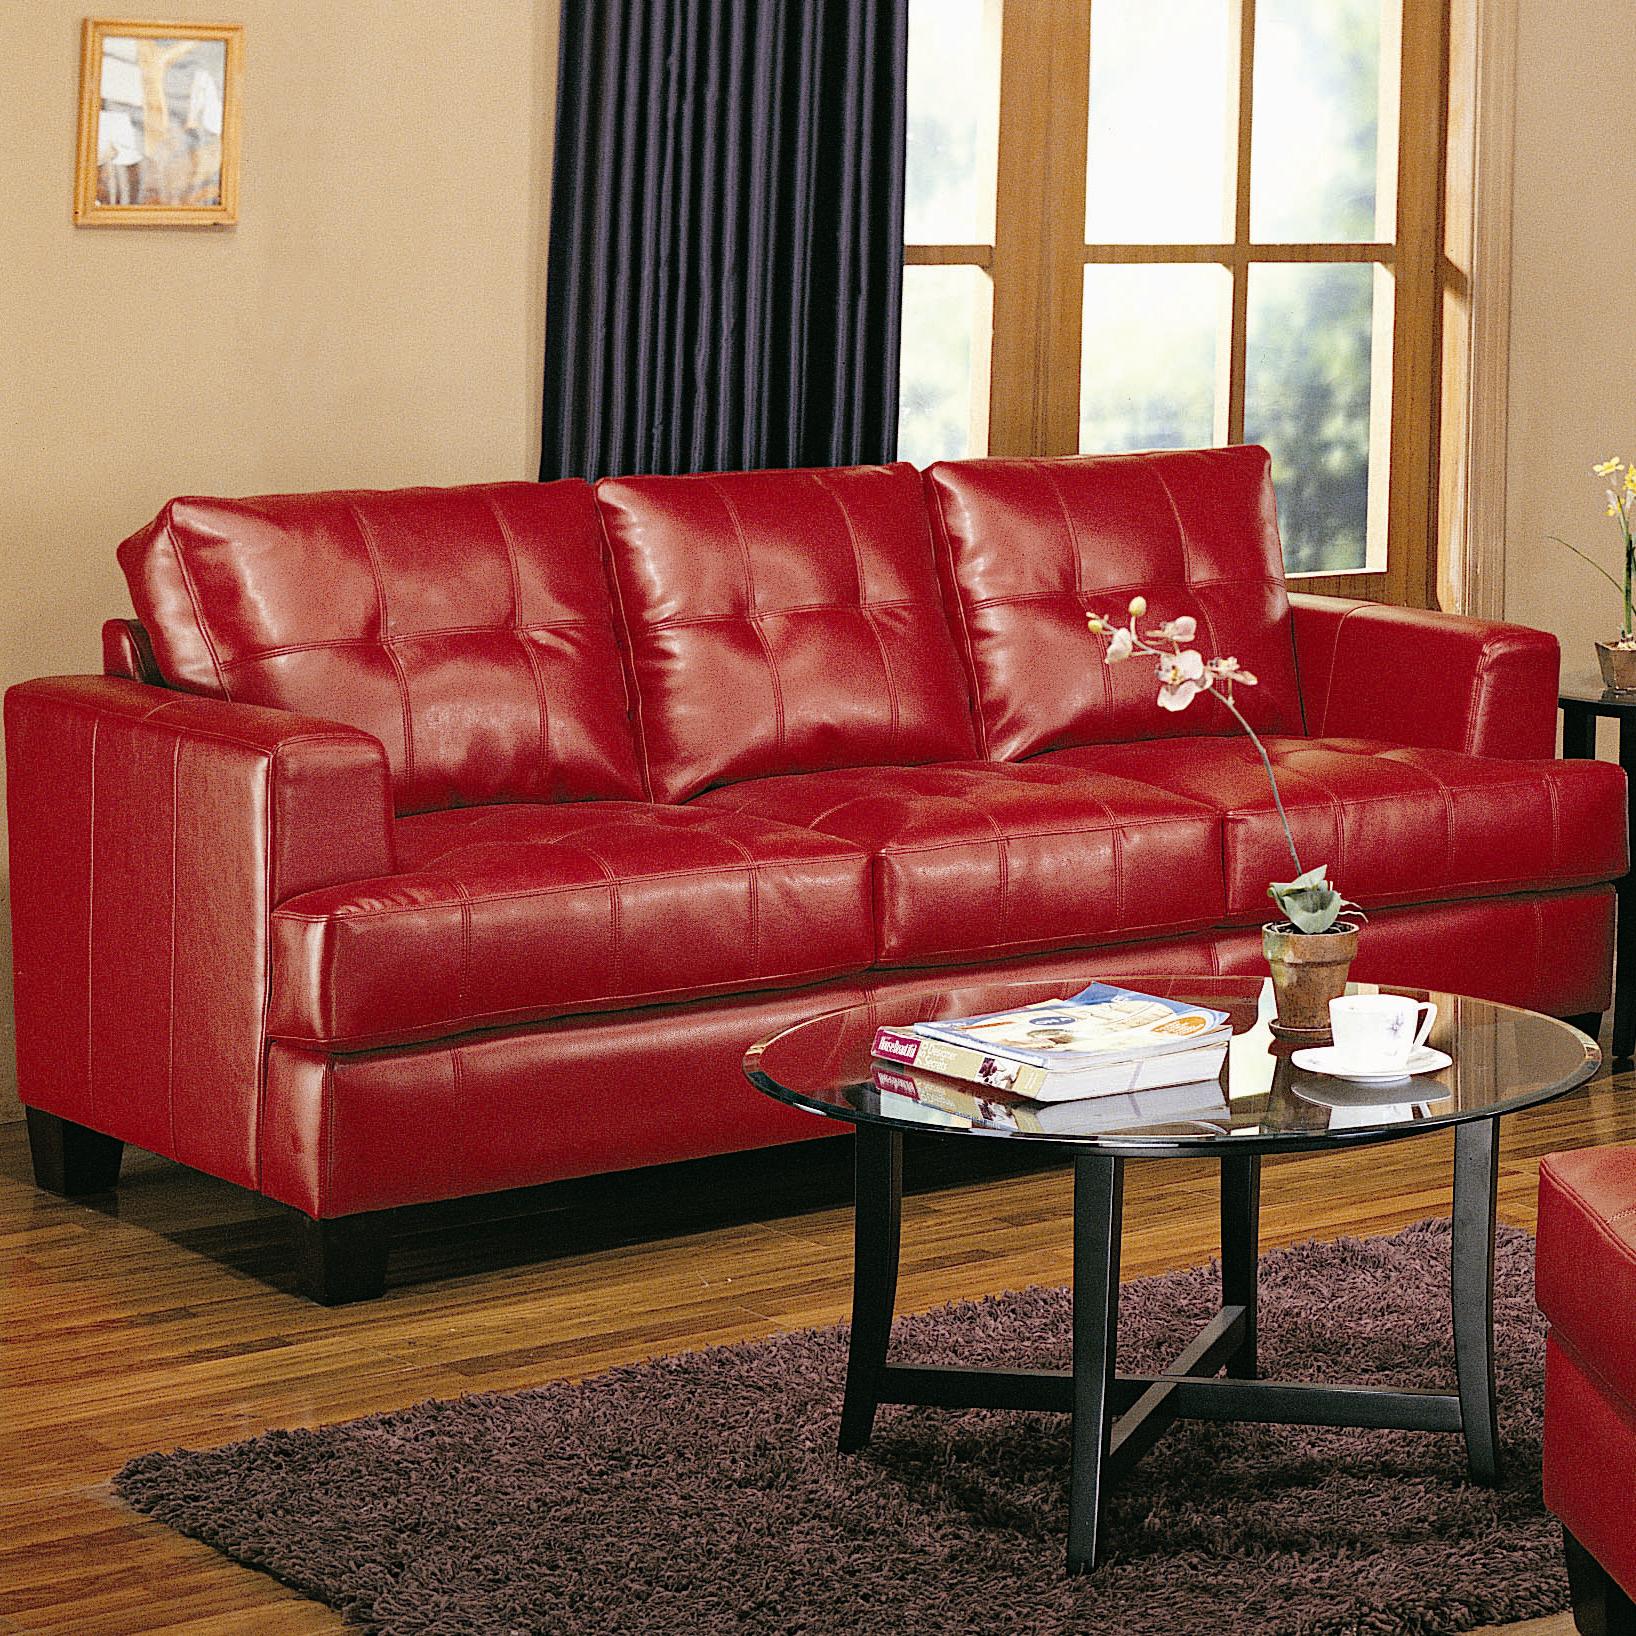 Classic Living Red Astounding Classic Living Room With Red Leather Sofa Dark Brown Shag Carpet And Light Brown Floor Made From Wooden Veneer Furniture Outstanding Living Room Furnished With A Red Leather Couch Or Sofa Sets